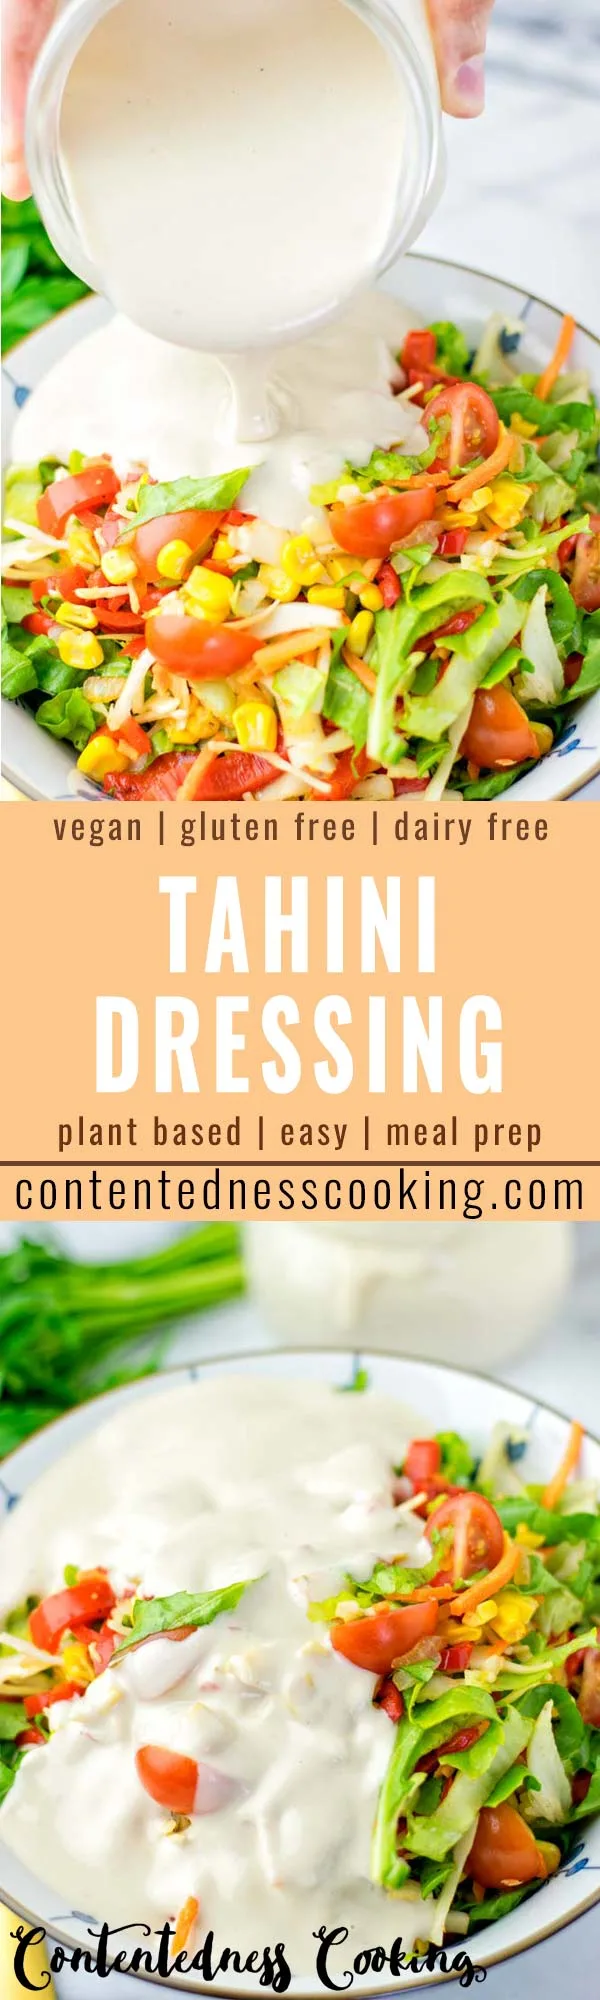 This Tahini Dressing is so delicious and easy to make. It is perfect over salad, makes any bland salad taste like a gourmet meal. It's also so versatile for pasta, potatoes and more. A keeper for dinner, lunch, meal prep ideas or just to make your vegetables so delicious. #vegan #dairyfree #vegetarian #glutenfree #tahinidressing #salad #pasta #dinner #lunch #mealprep #budgetmeals #comfortfood #contentednesscooking 